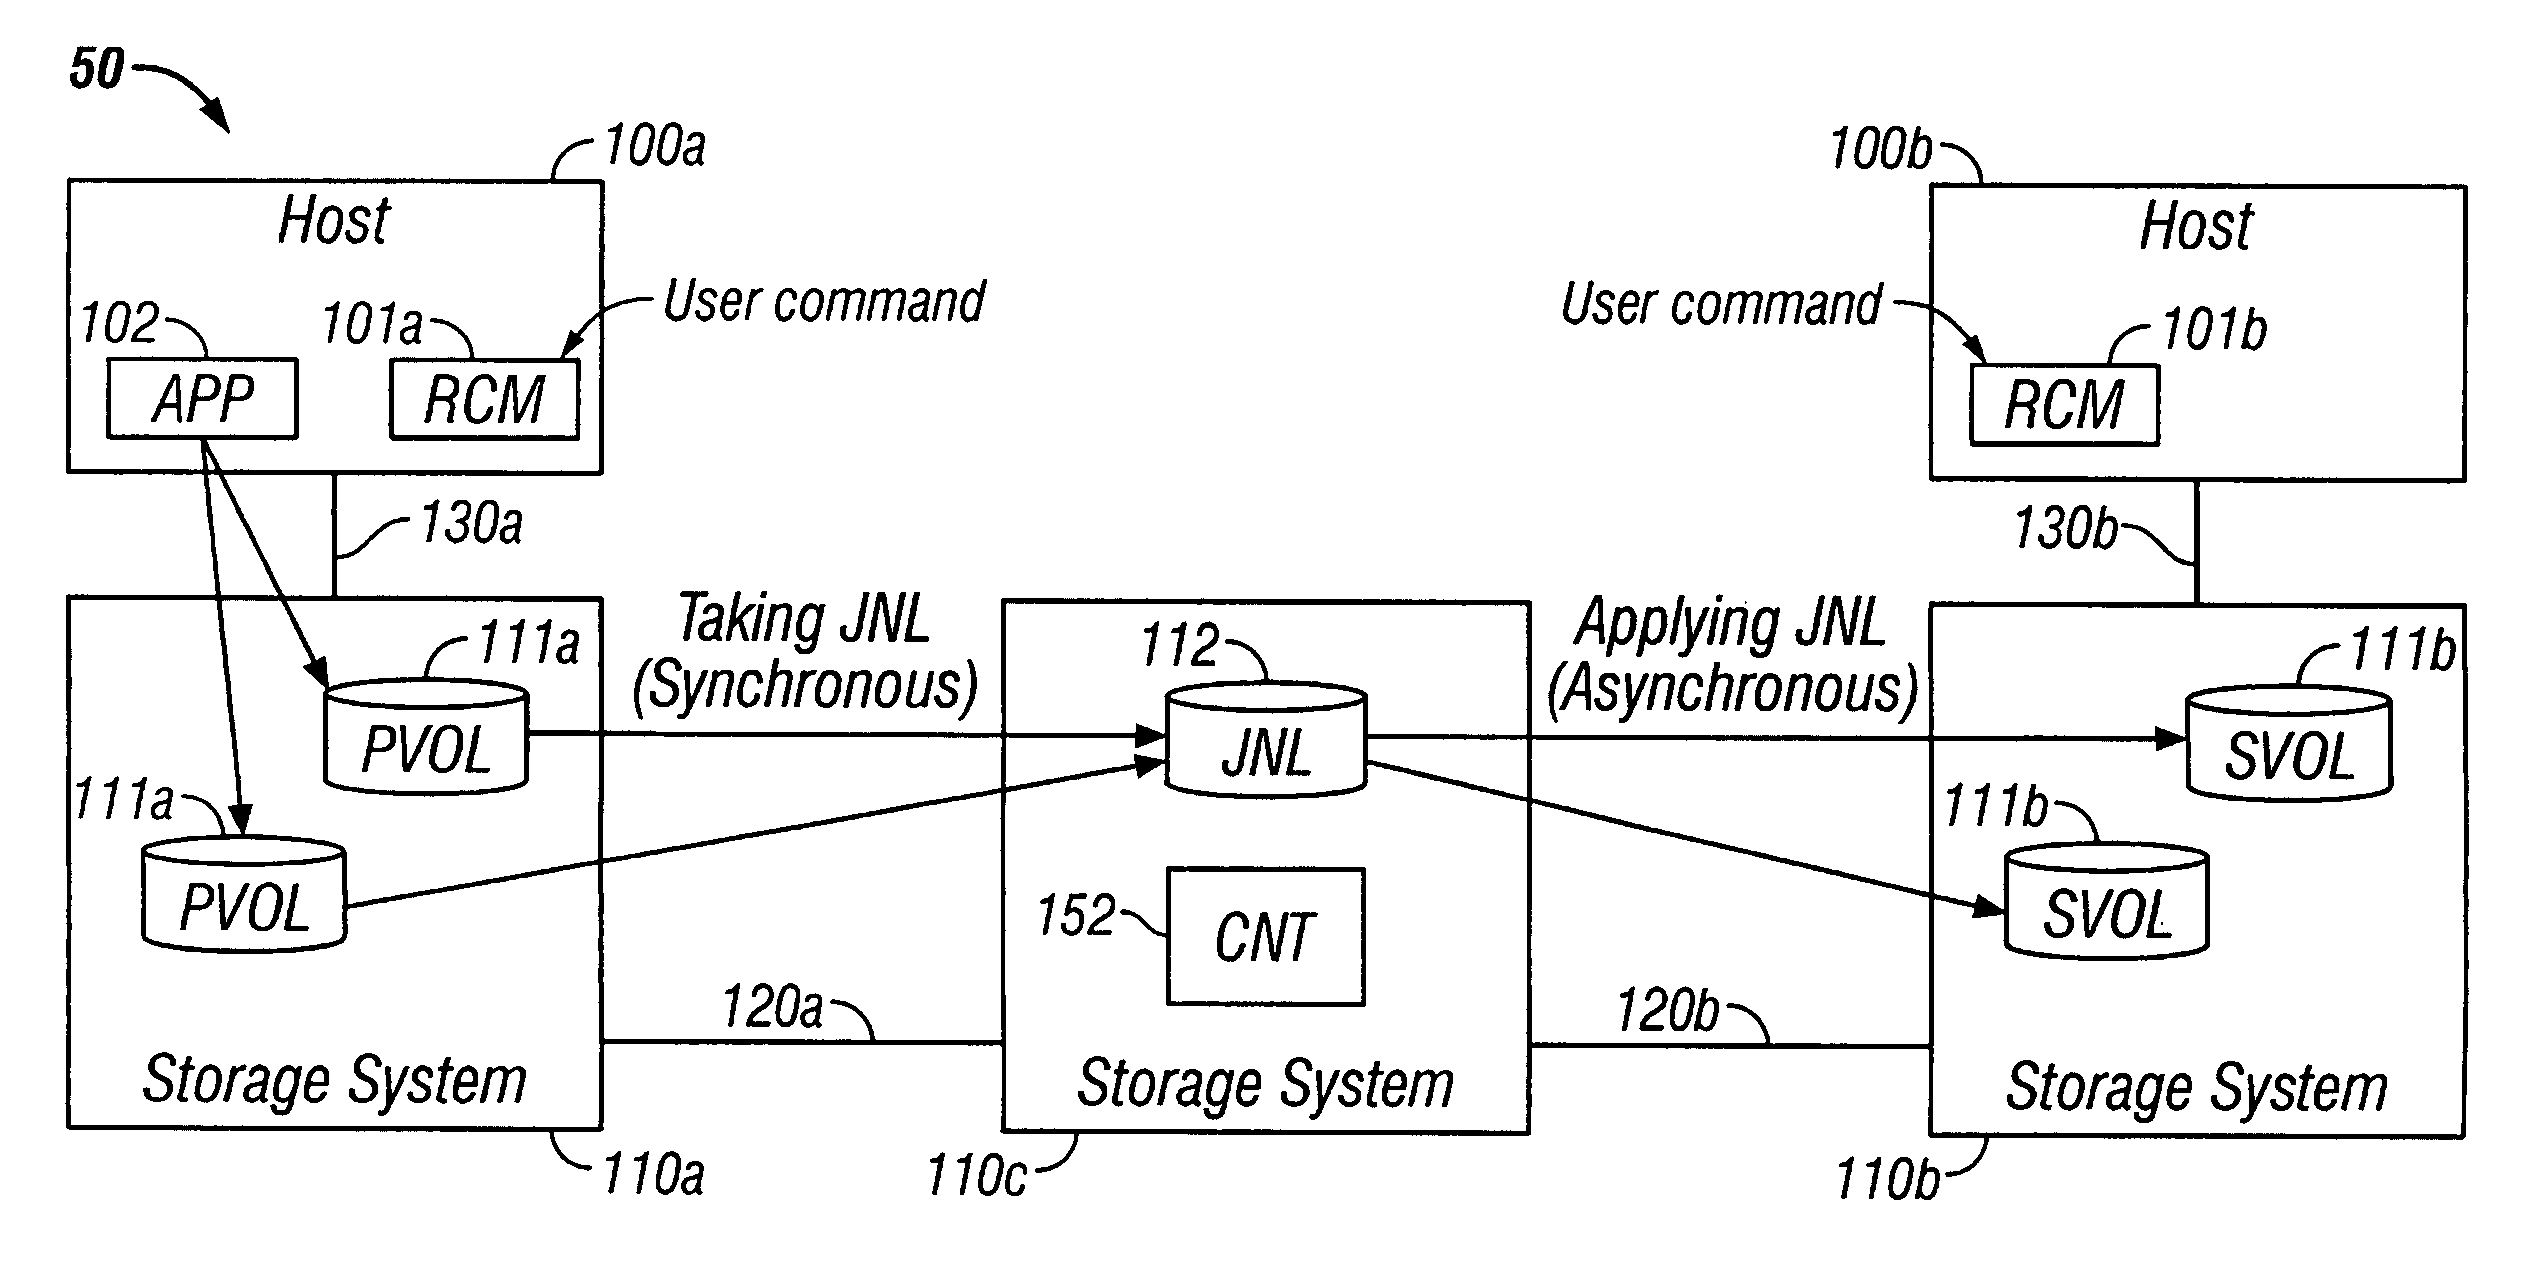 Three data center remote copy system with journaling